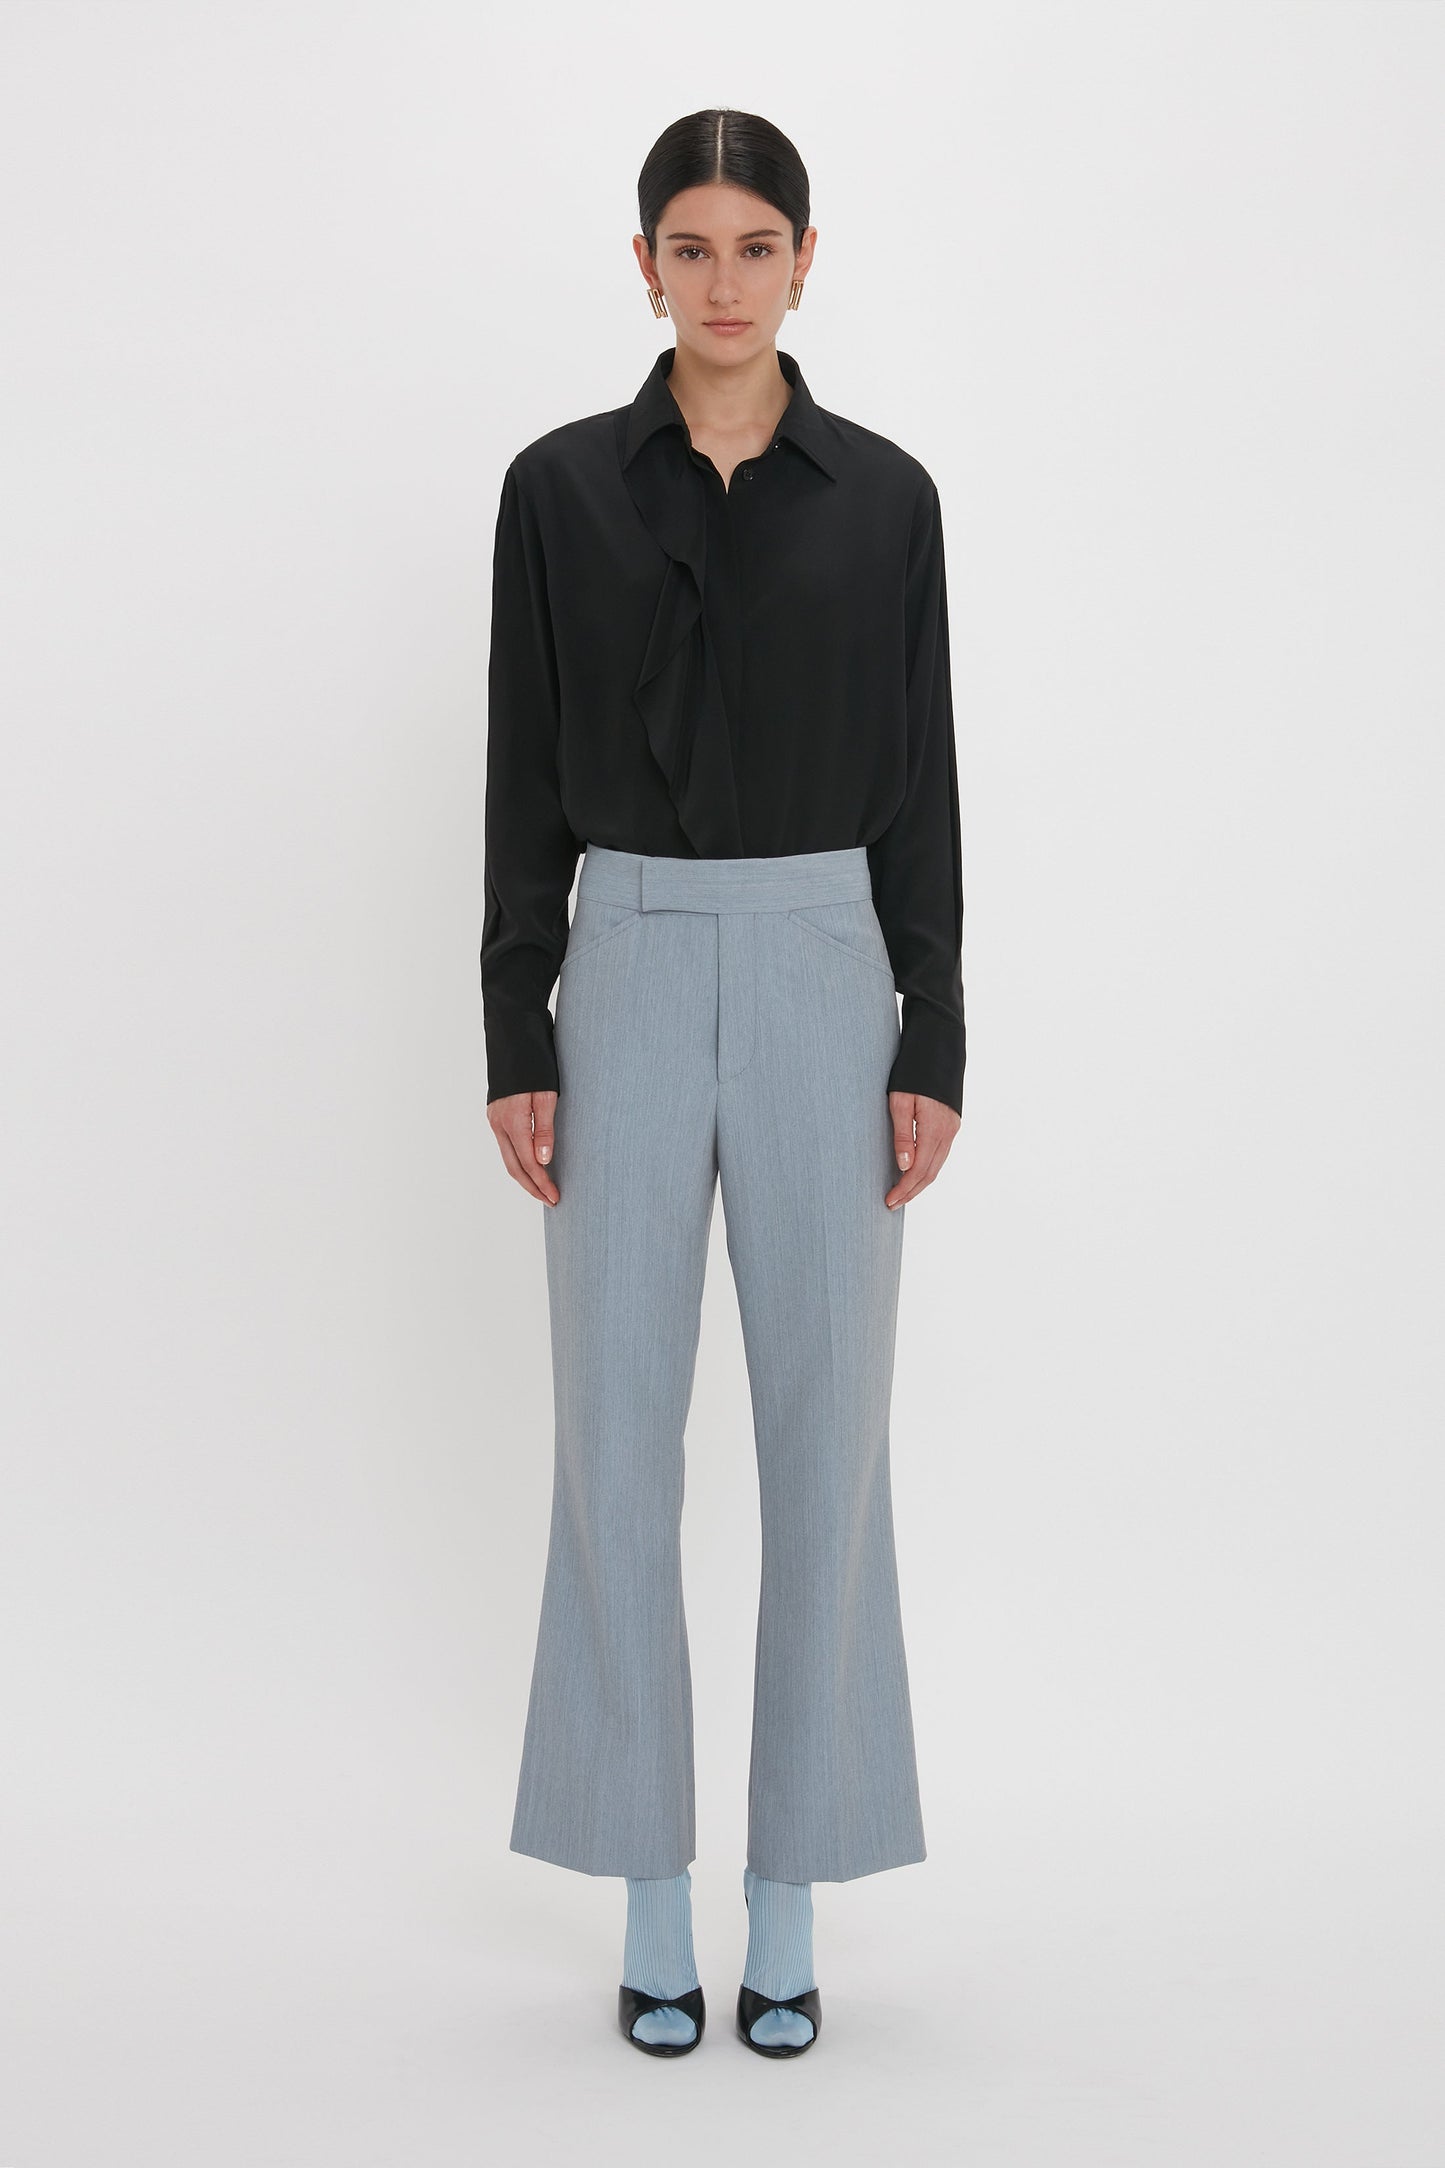 A person stands against a white background, wearing a black blouse, Victoria Beckham Exclusive Wide Cropped Flare Trouser In Marina in light grey wide-leg style with a flattering hint of ankle, and blue socks paired with black shoes.